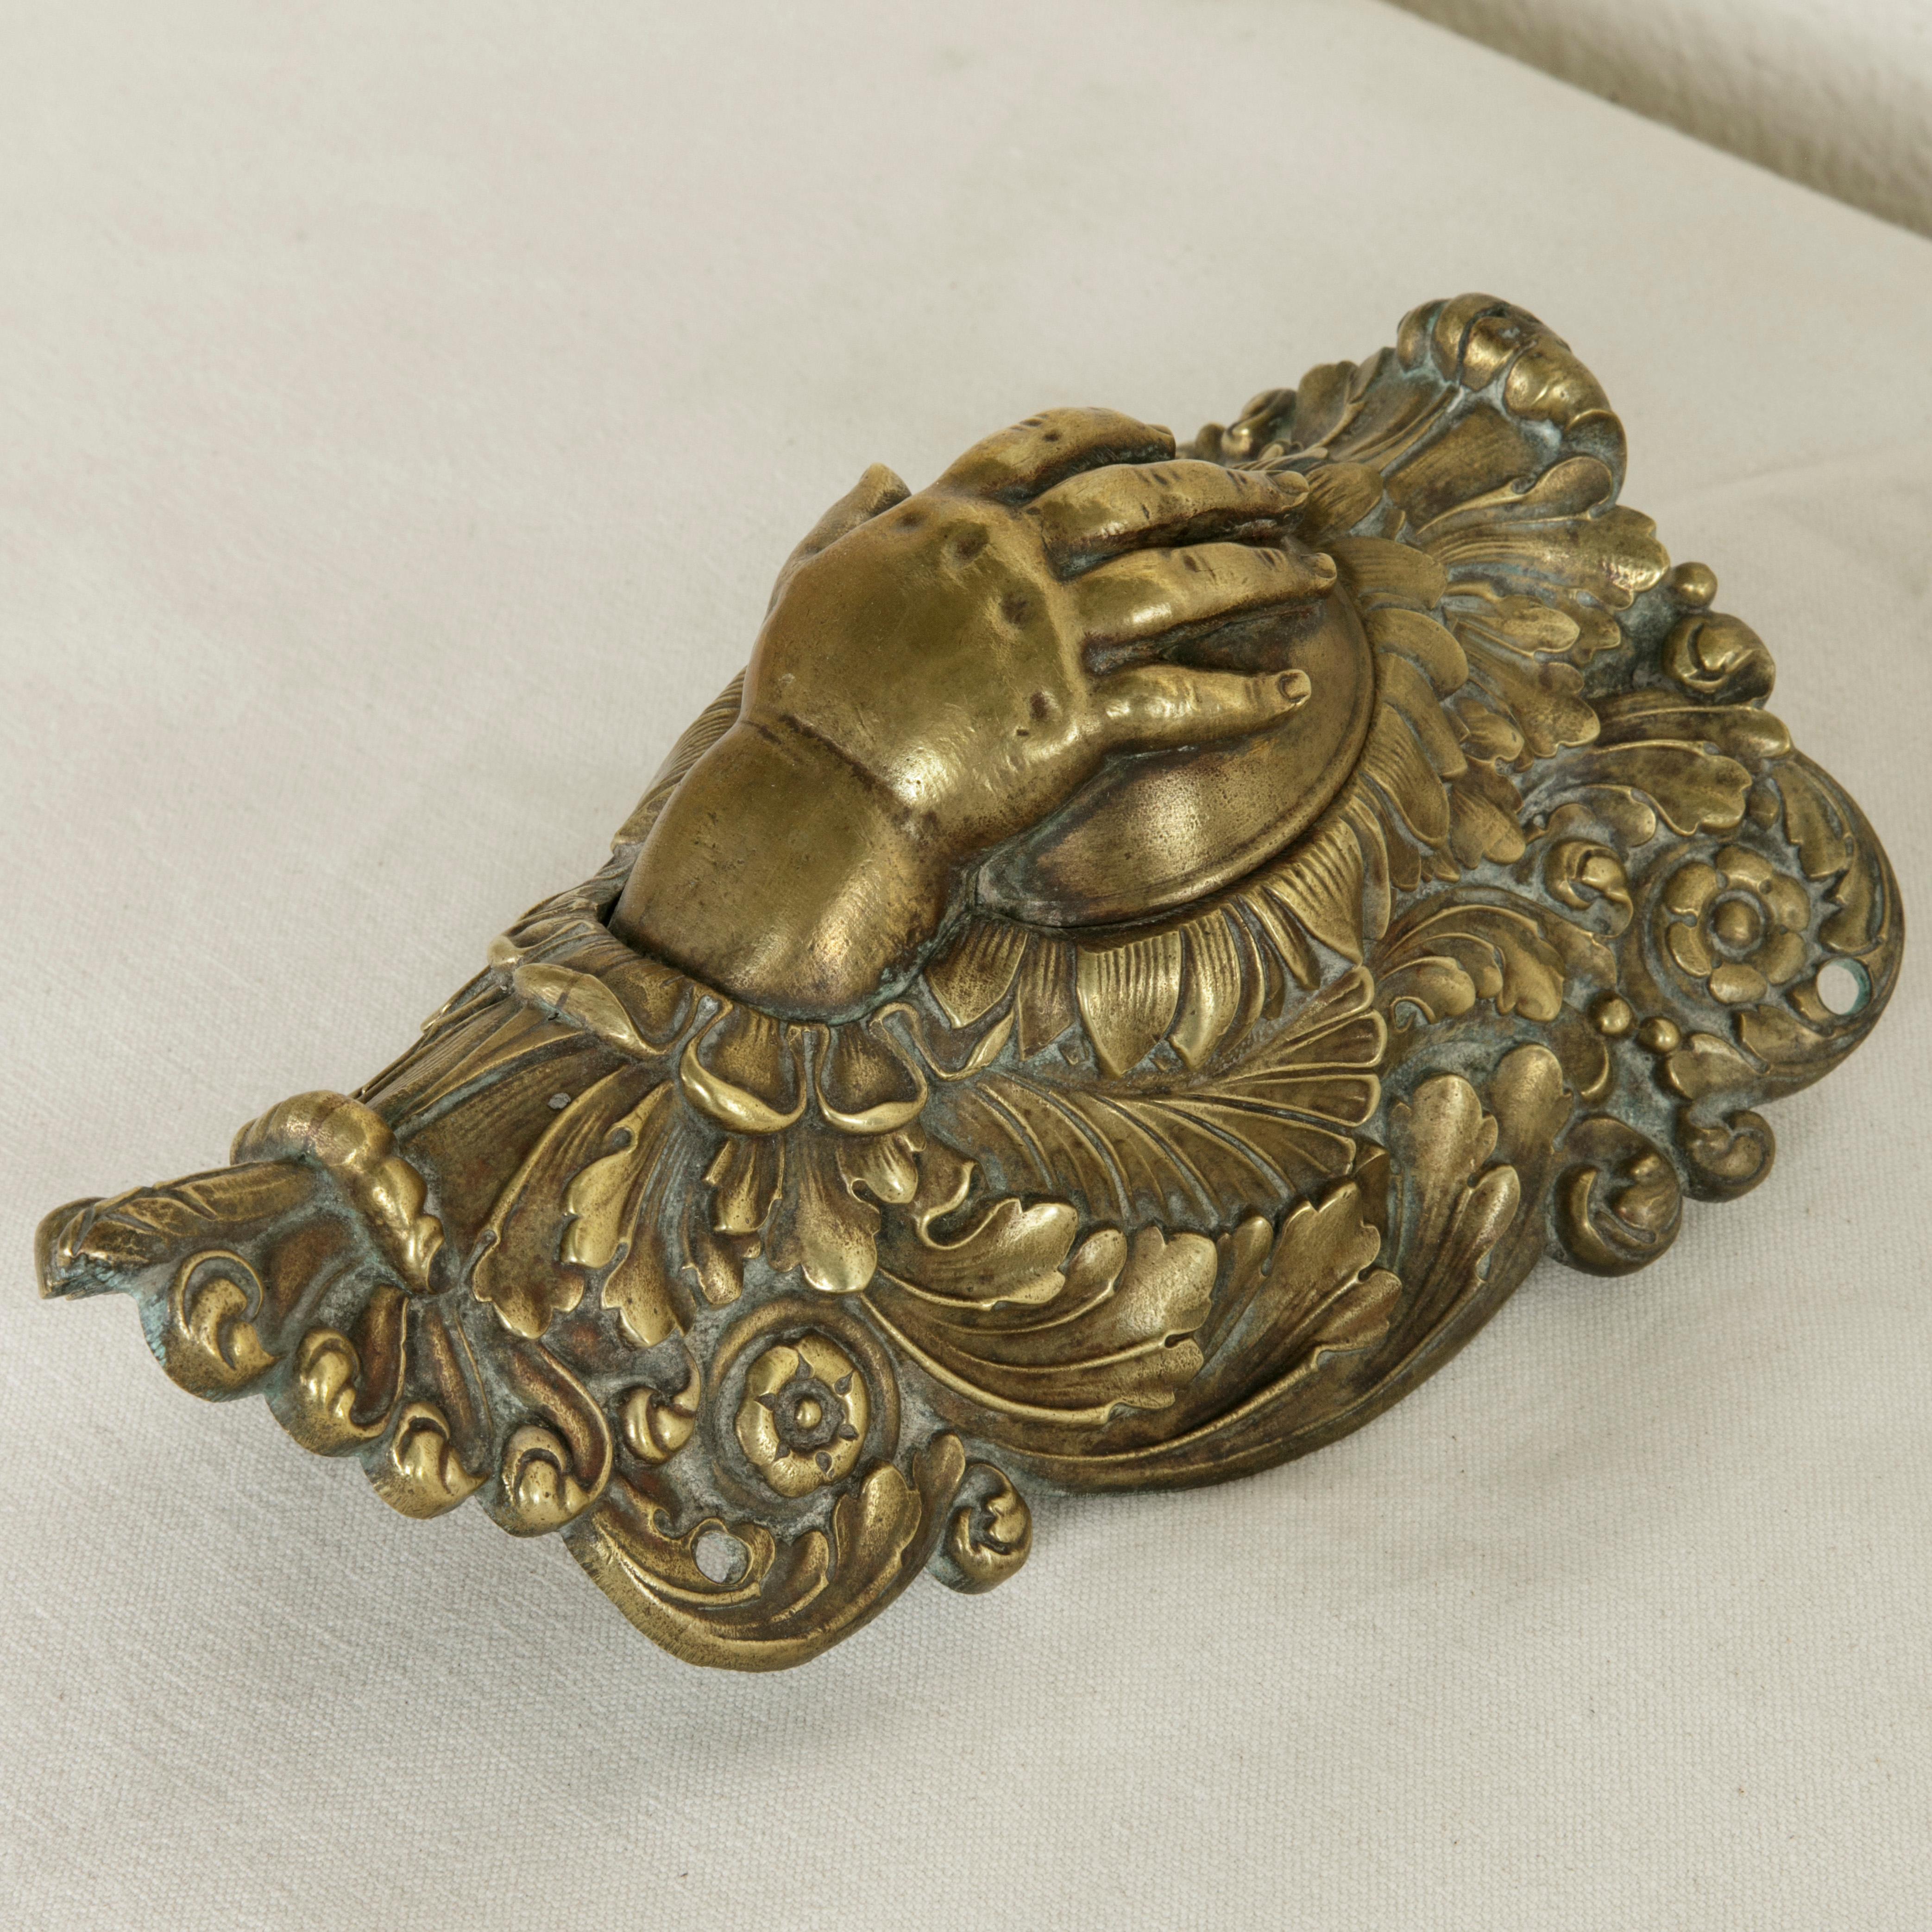 This 19th century Napoleon III period solid bronze billiard corner pocket features a dimpled child's hand. As a corner pocket on its original circa 1860 billiard table, the hand dropped forward to catch the billiard ball as it rolled into the